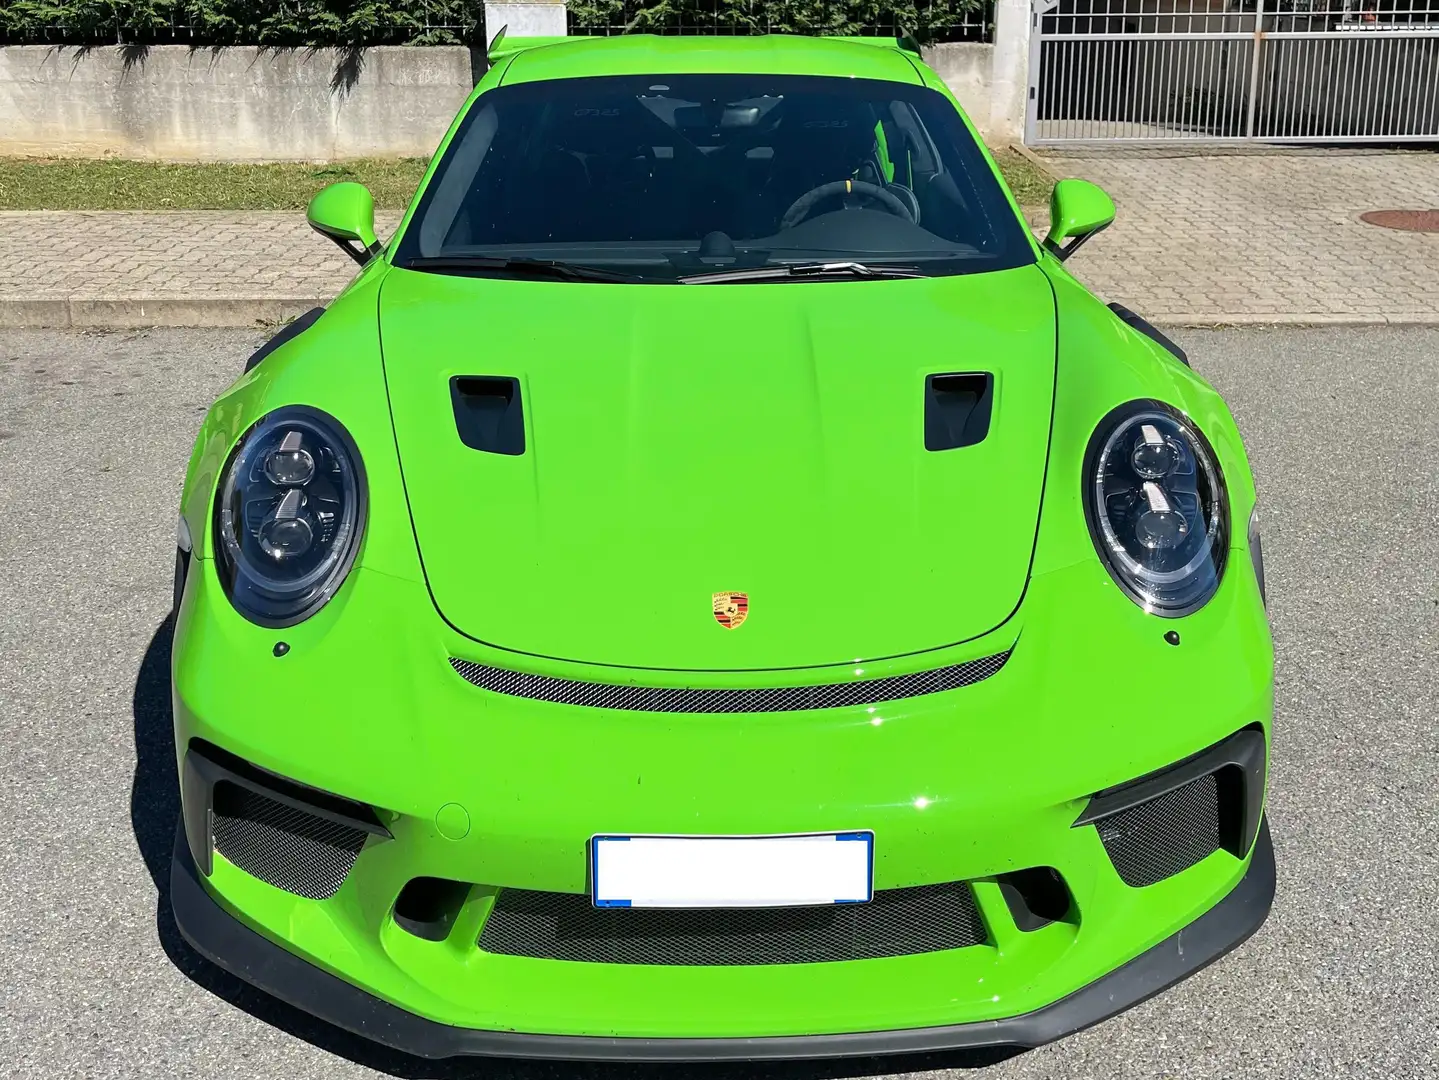 Porsche 911 911 Coupe 4.0 GT3 RS auto - PORSCHE APPROVED - IVA Green - 2